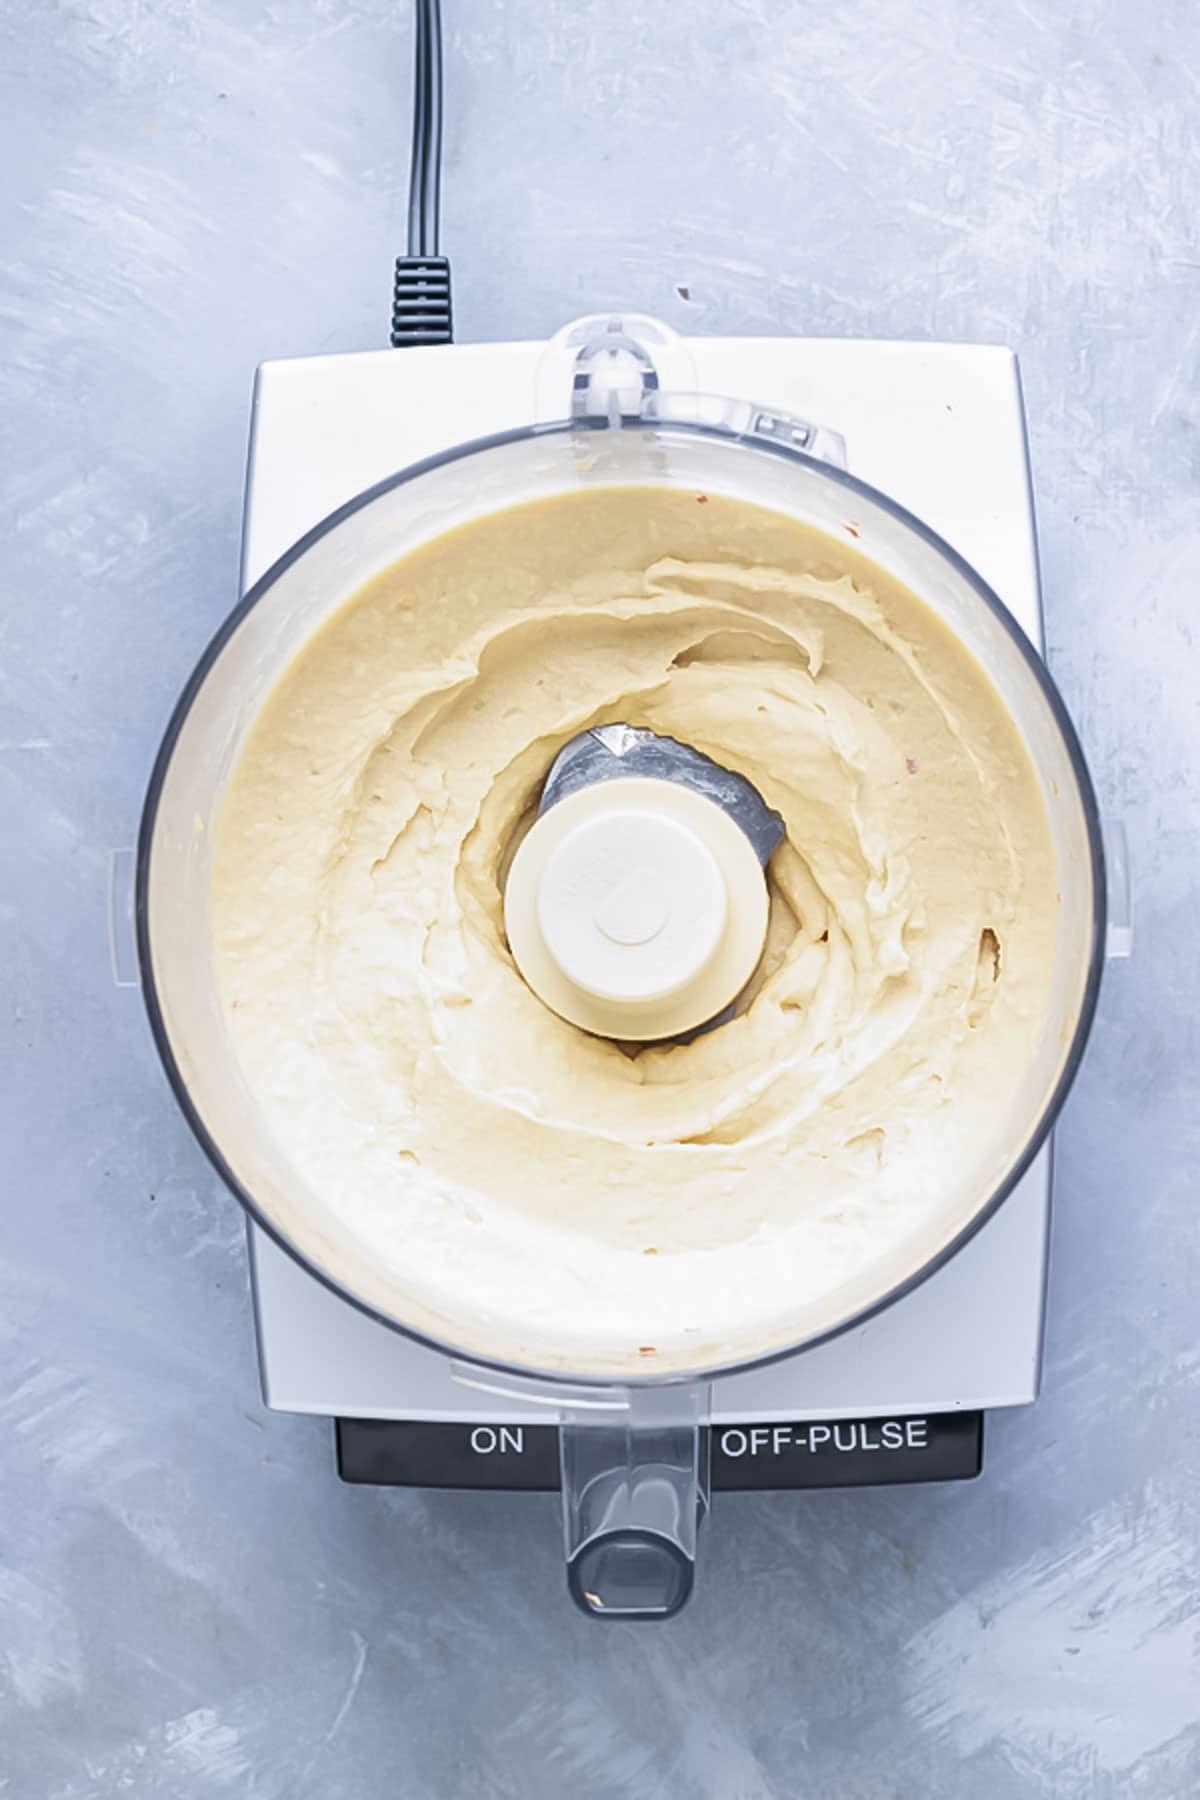 Fully blended hummus sits inside a food processor.